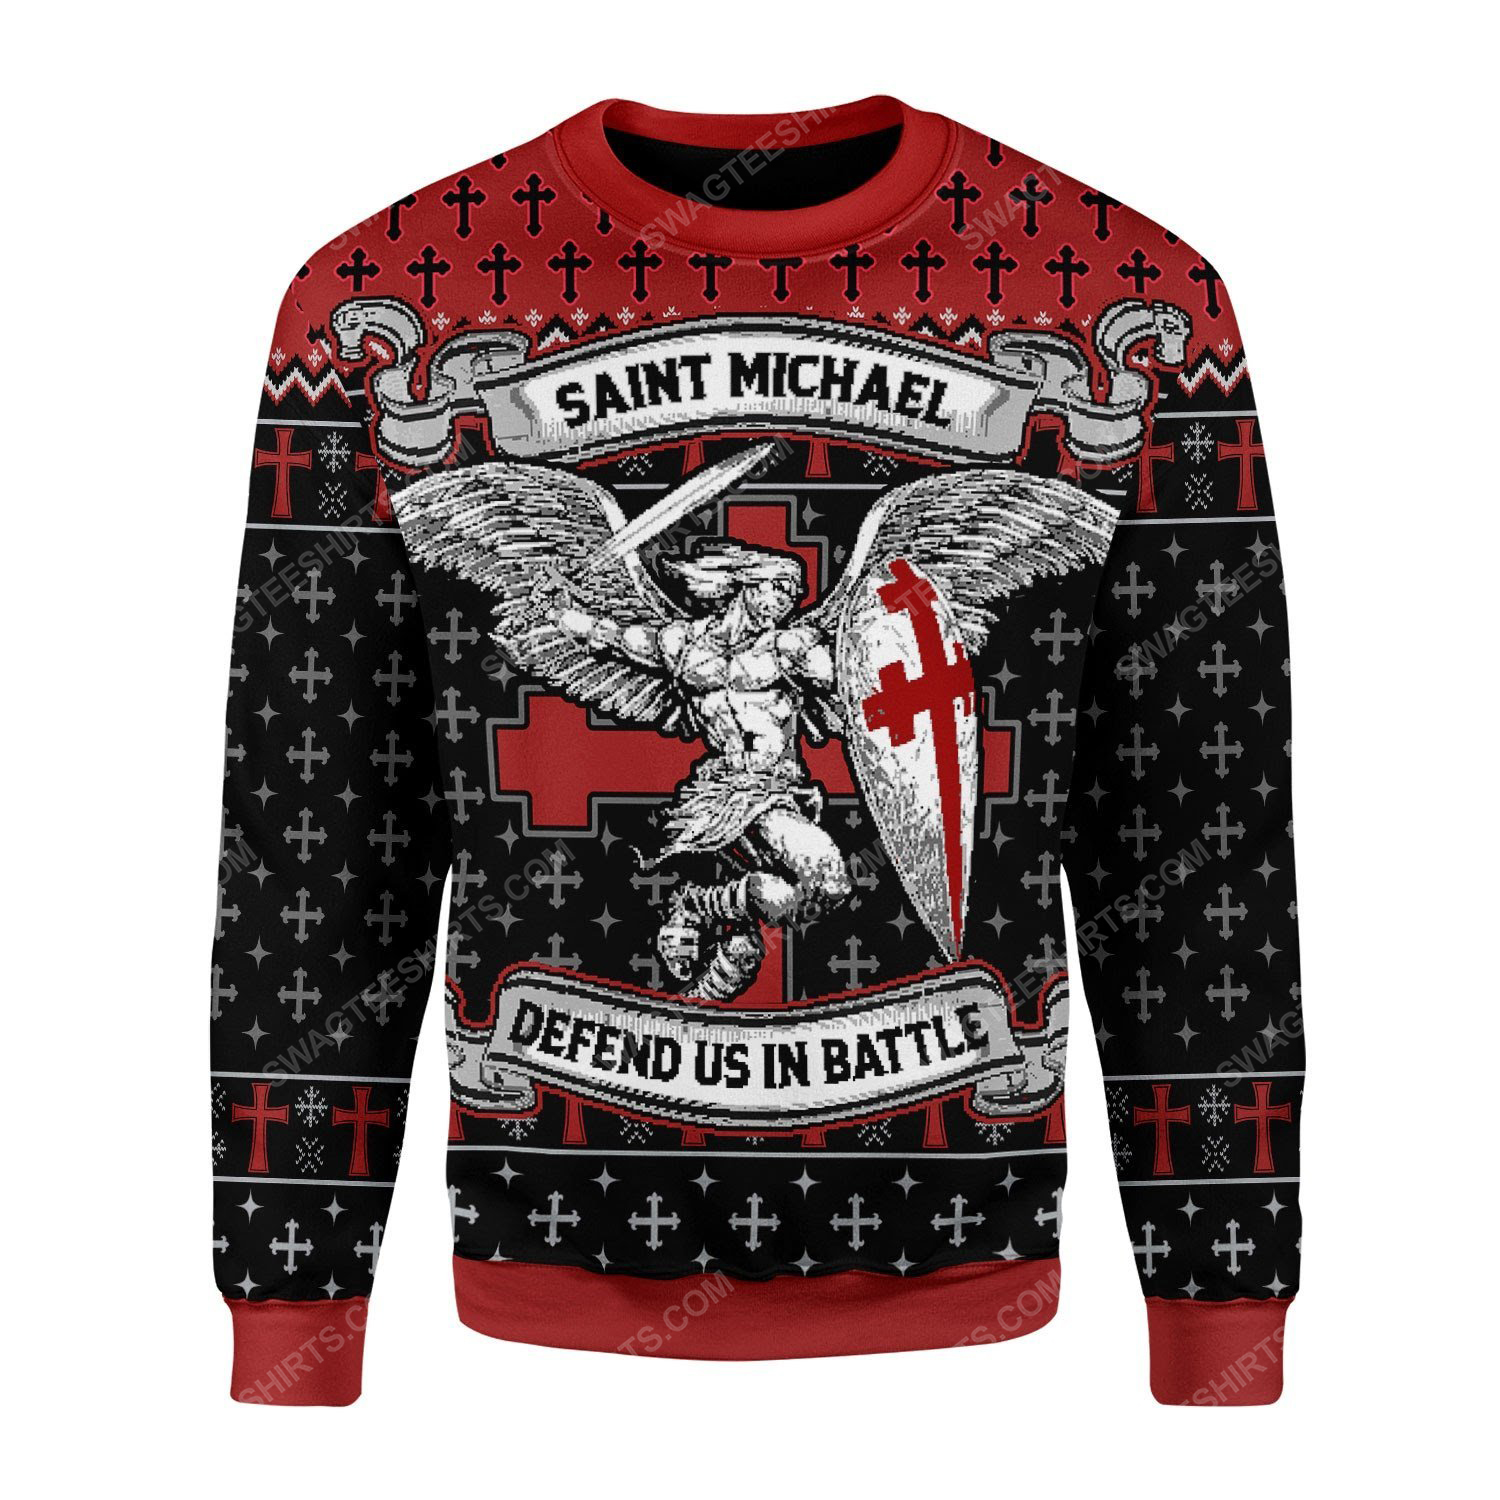 [special edition] Catholic defend us in battle saint michae ugly christmas sweater – maria